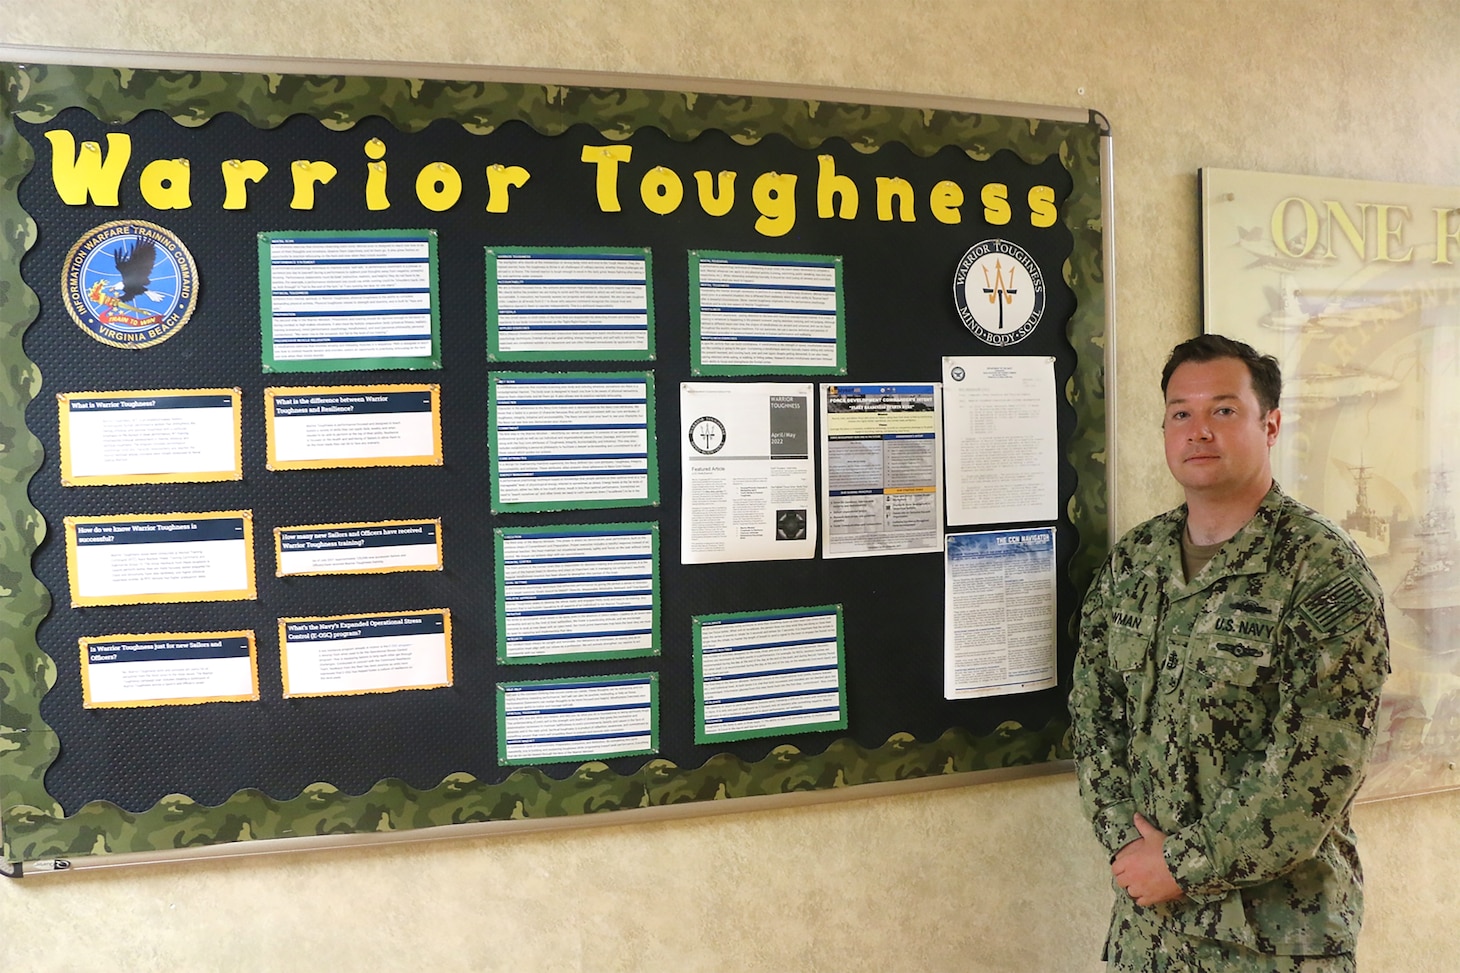 Intelligence Specialist Chief Wade Bowman, assigned to Information Warfare Training Command (IWTC) Virginia Beach, has been a vital component of the command's Warrior Toughness (WT) program and has helped usher in a mindset focused on encouraging mental health awareness.